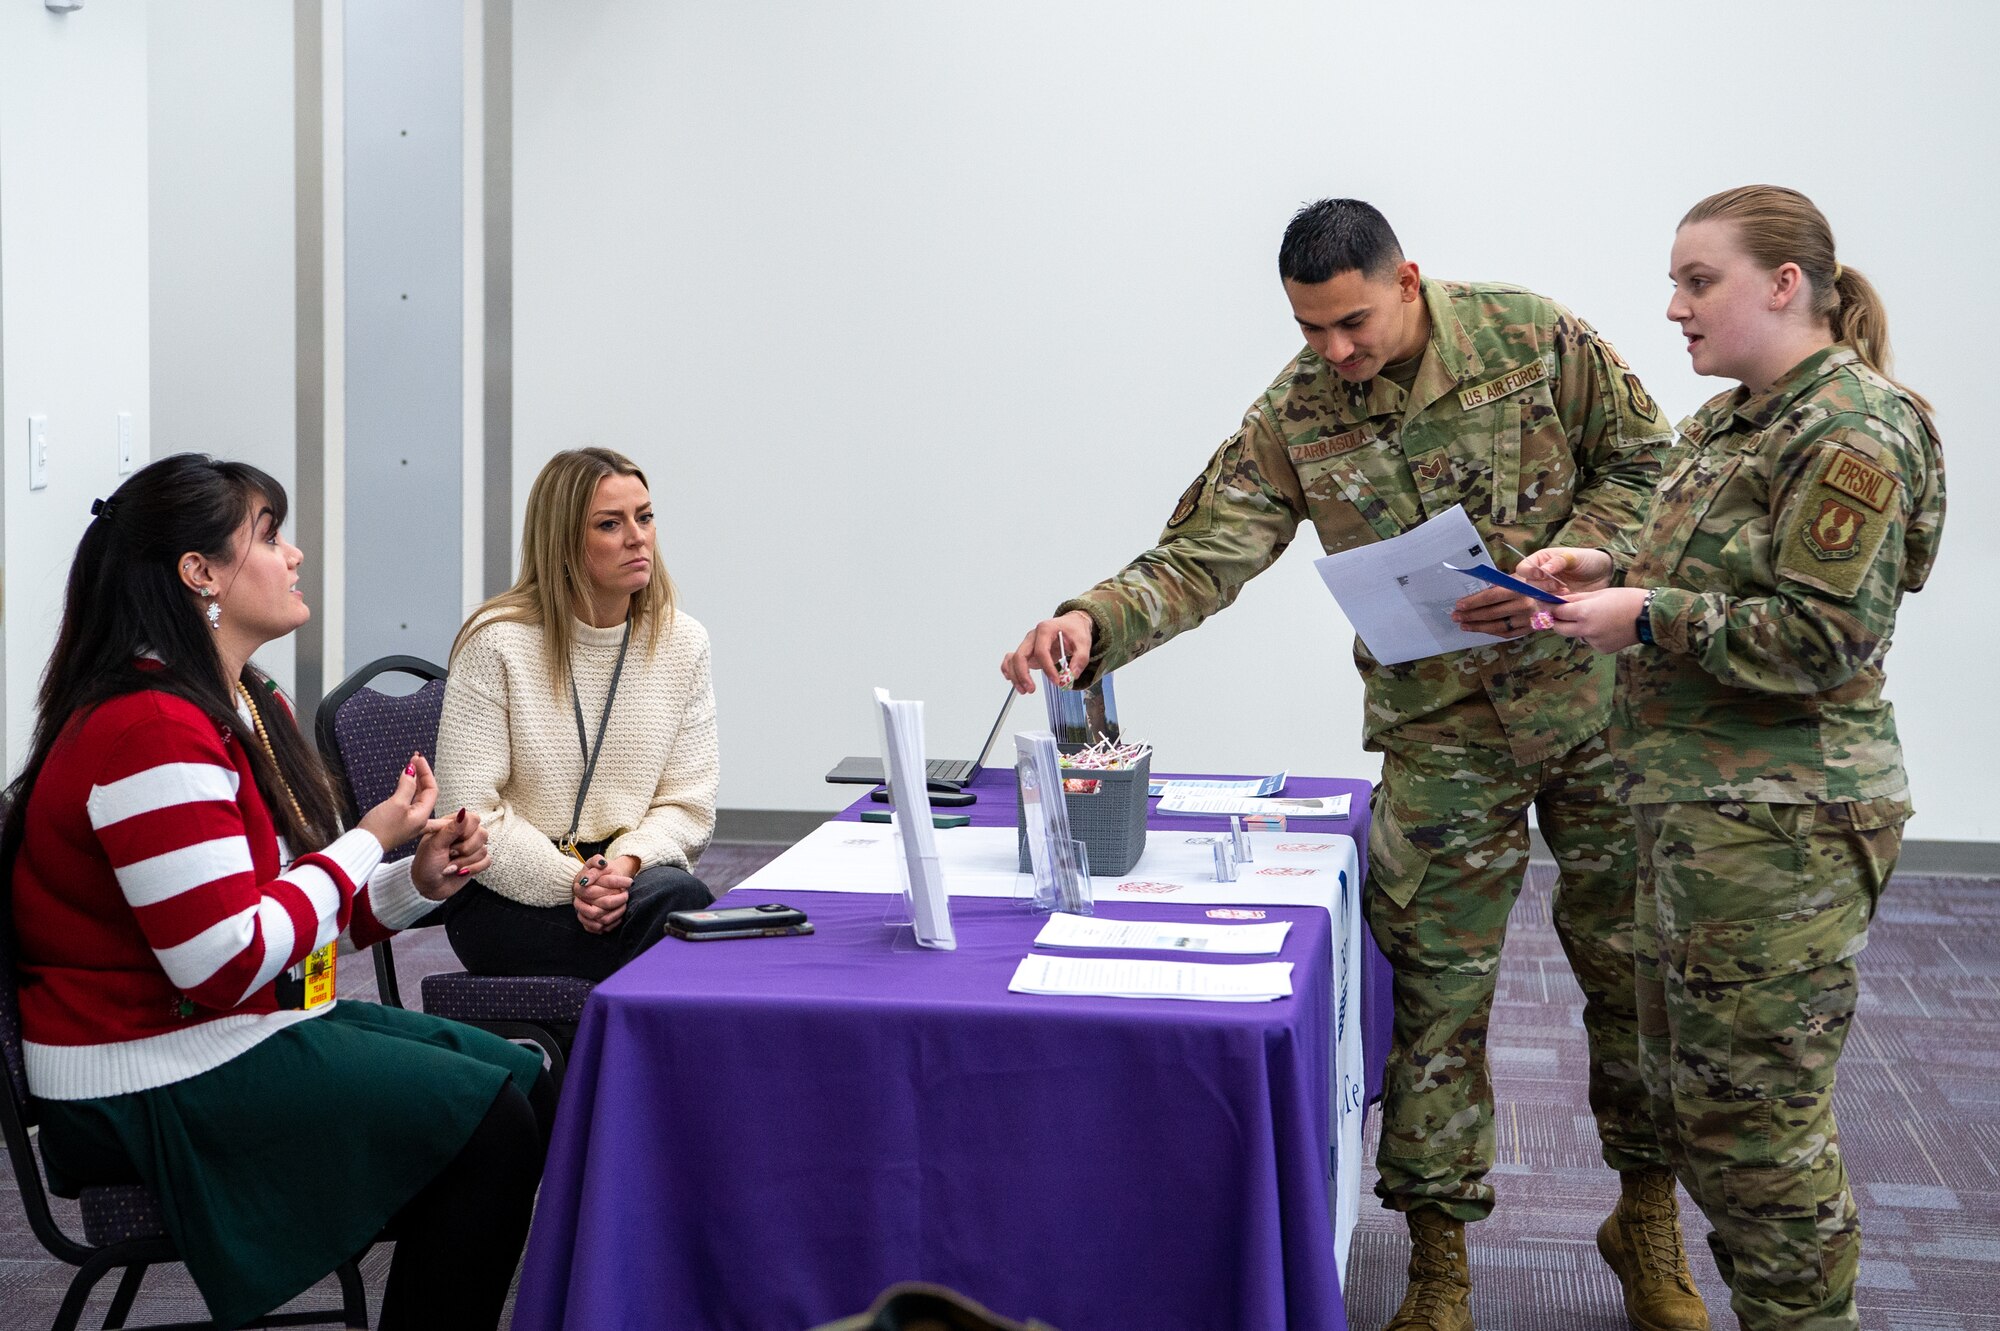 U.S. Air Force Airman interacting with Weber State University Staff during Affinity Summit